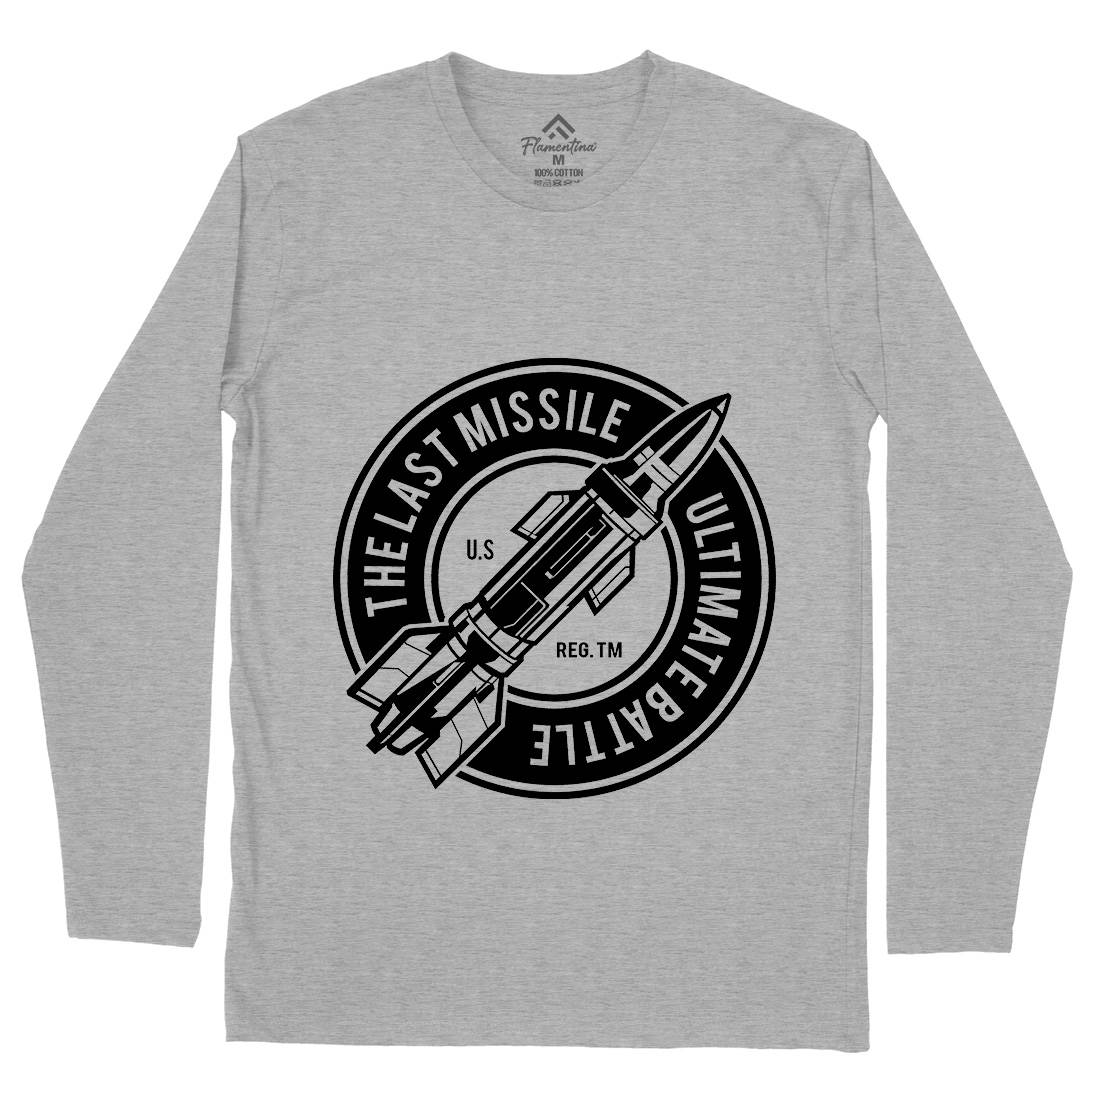 Last Missile Mens Long Sleeve T-Shirt Army A175